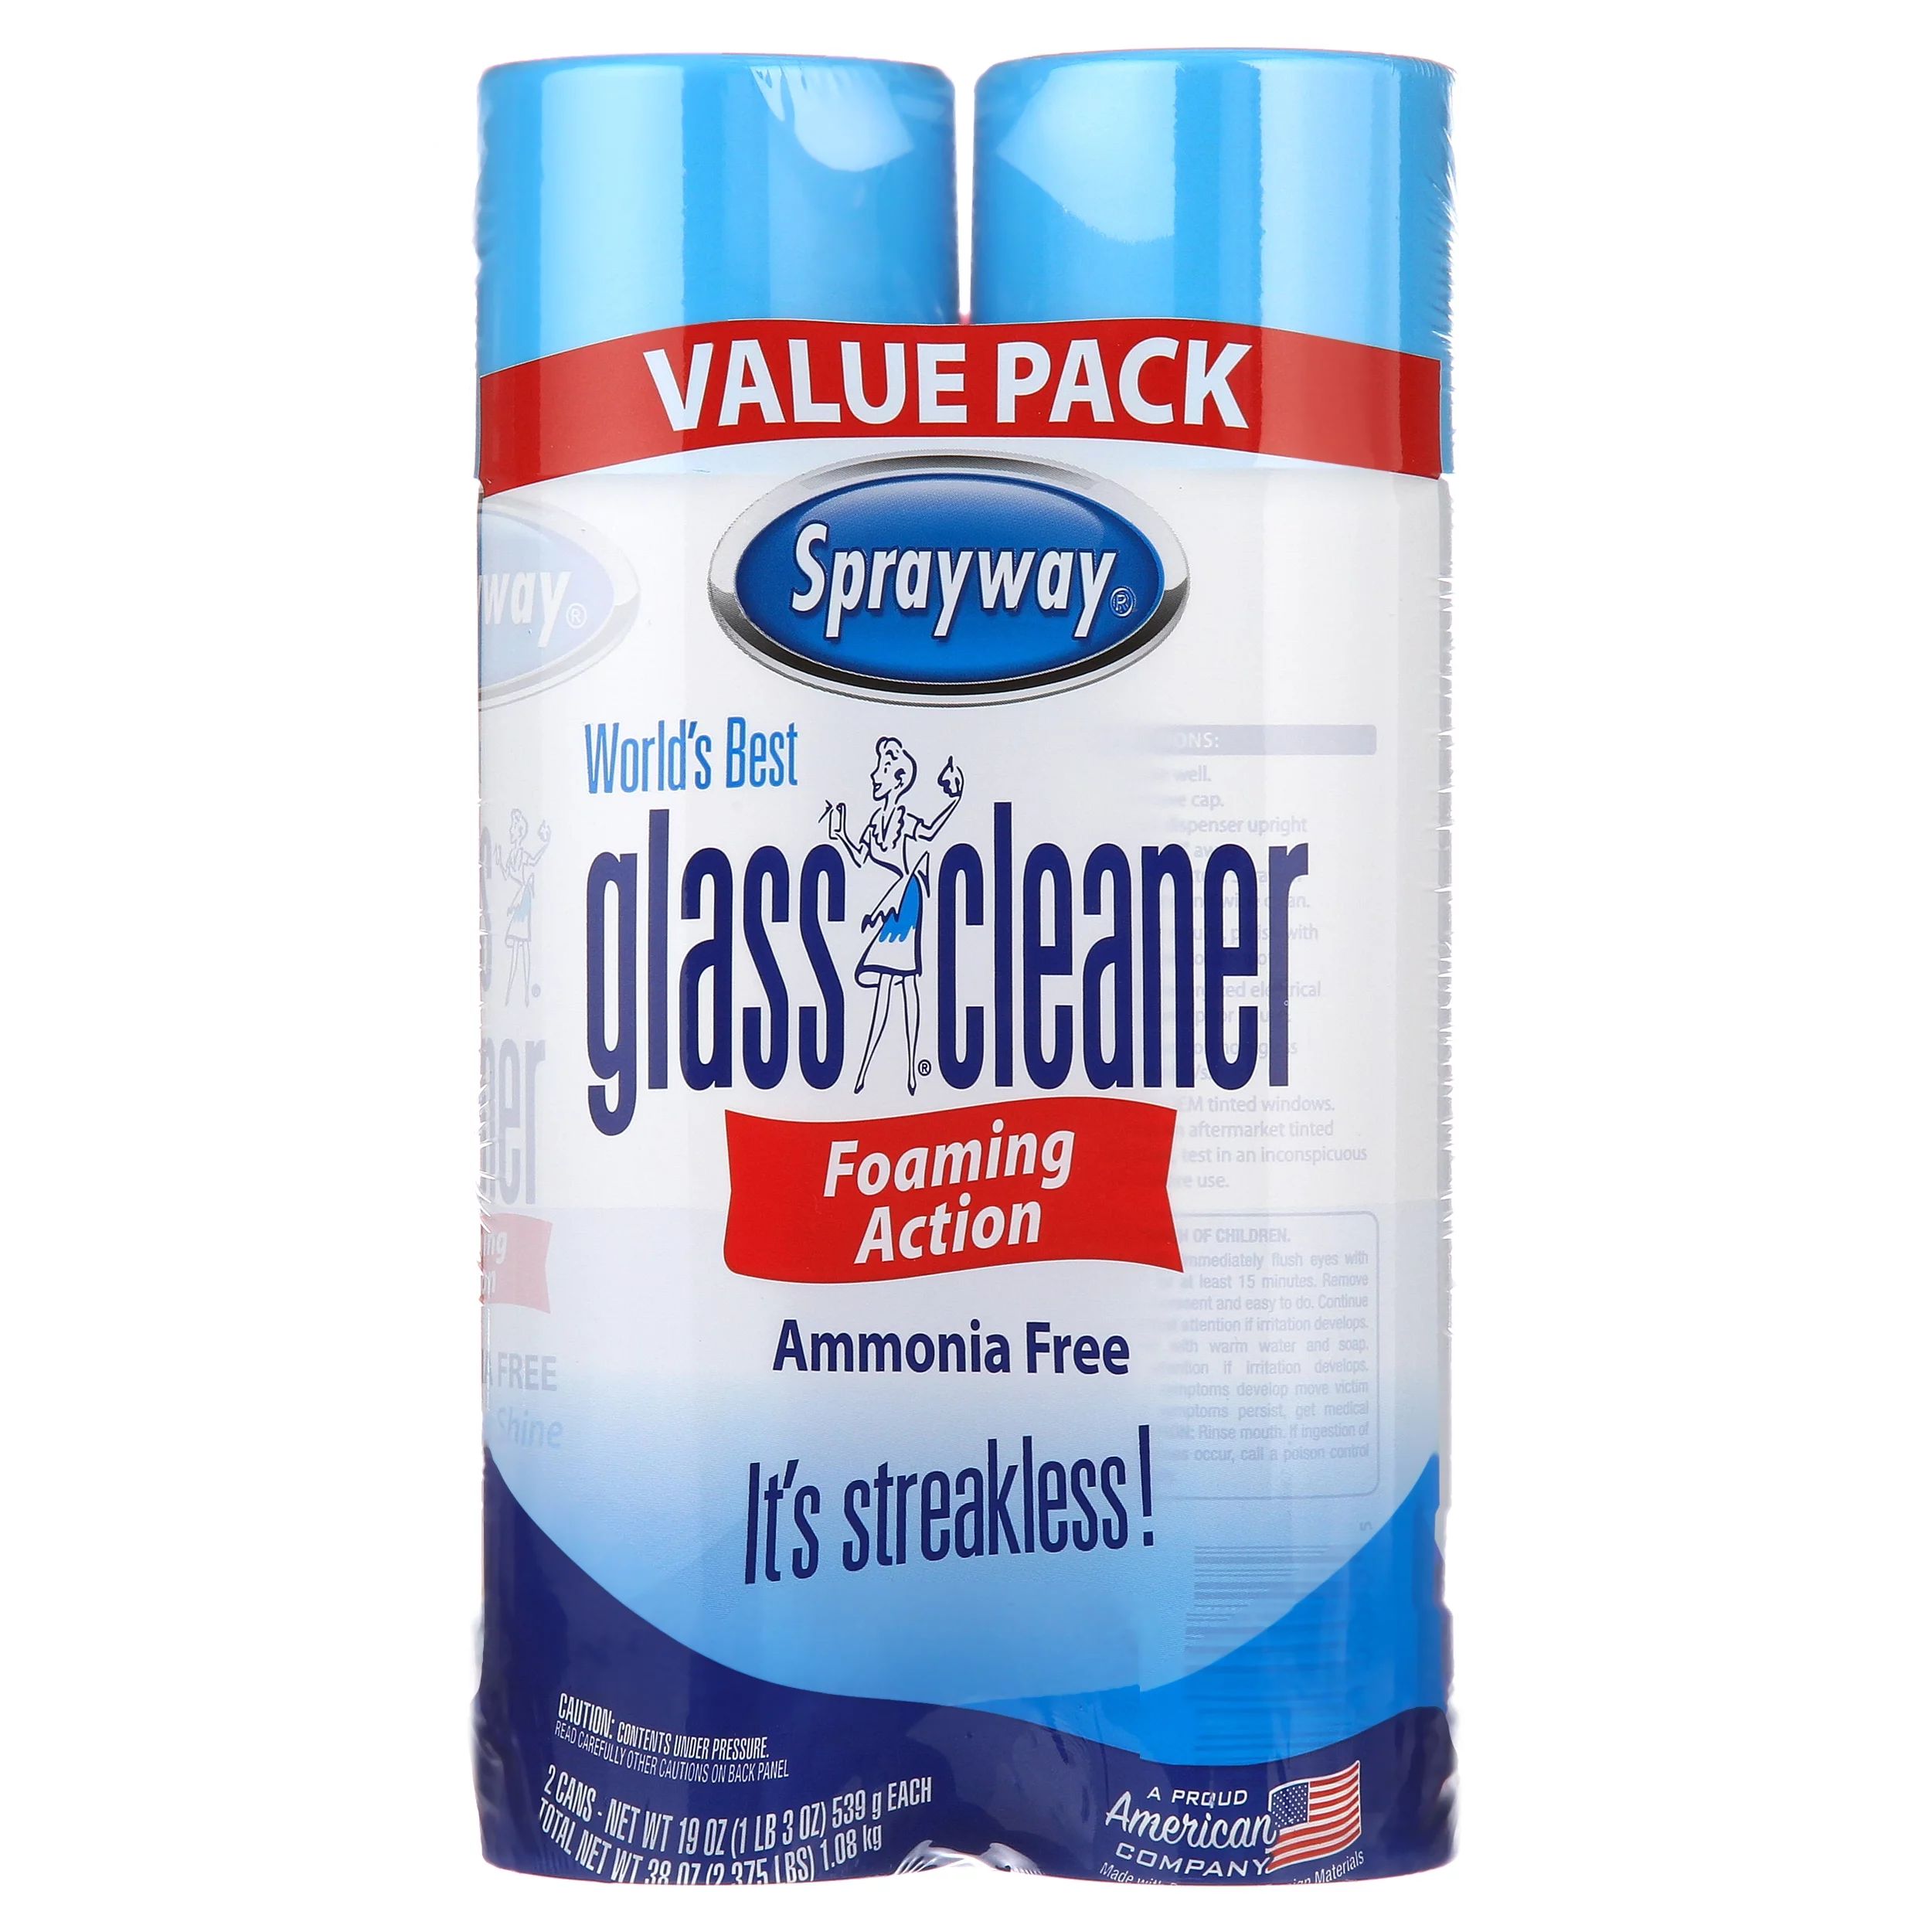 Sprayway World's Best Glass Cleaner, Value Pack, 2x19oz for product net content of 38oz | Walmart (US)